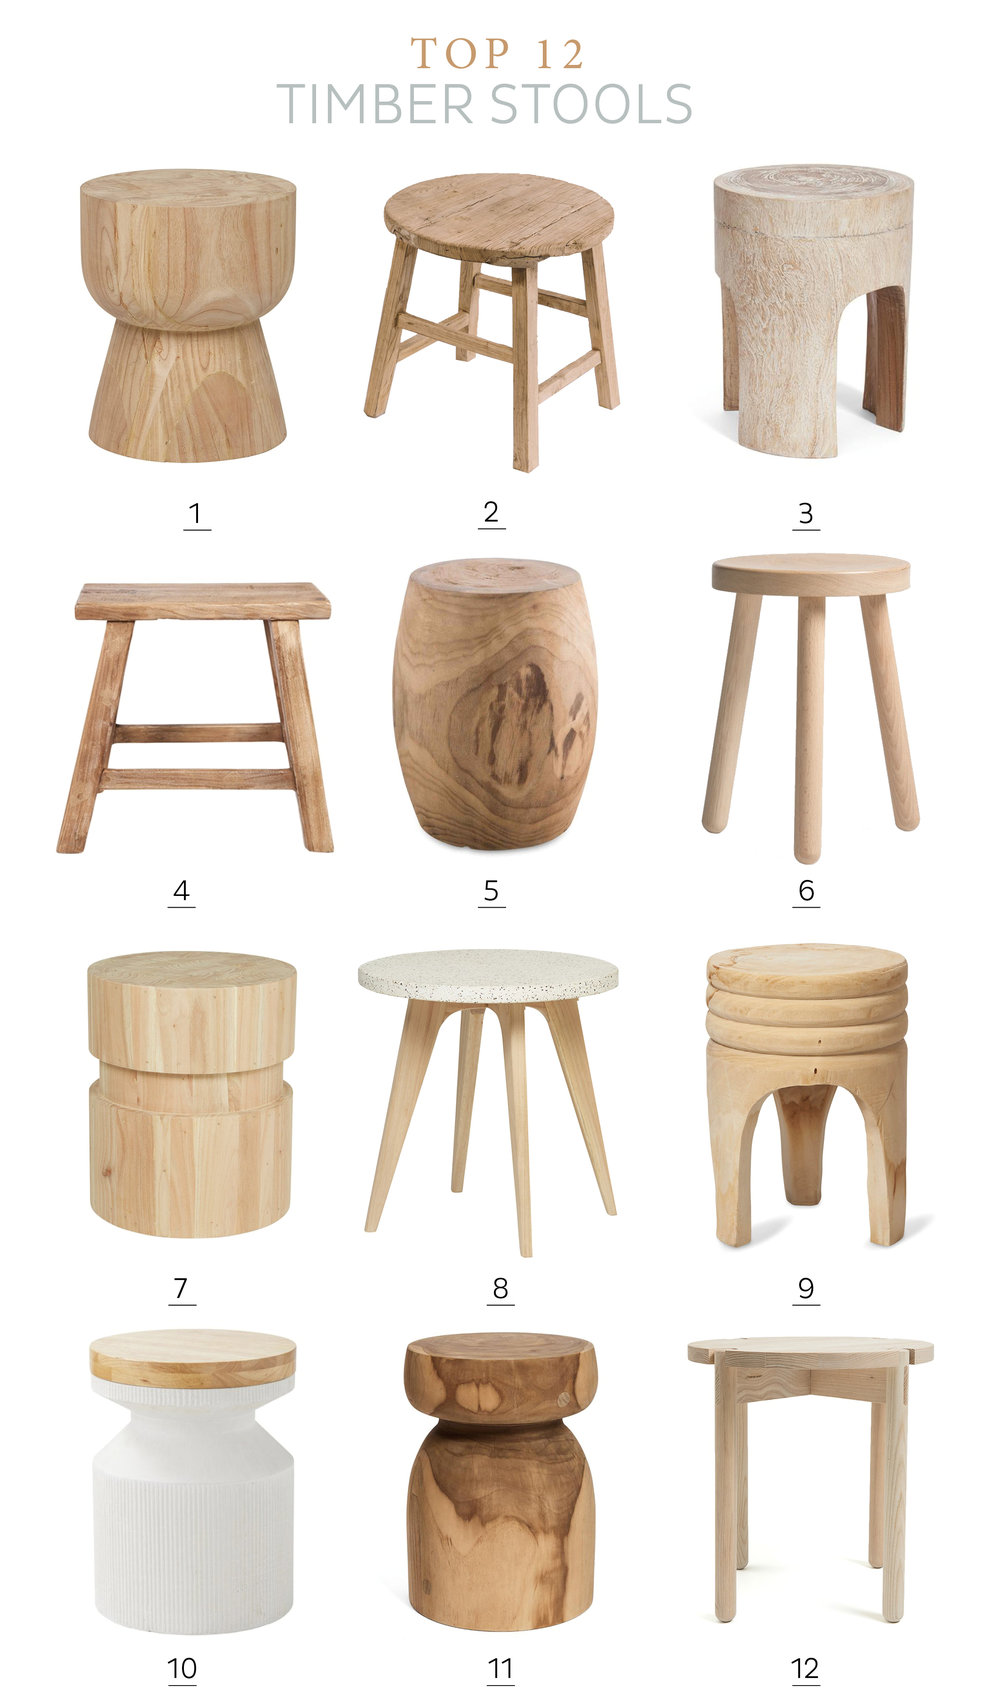 Timber Stools Roundup Adore Home, Wooden Stump Stool Bathroom